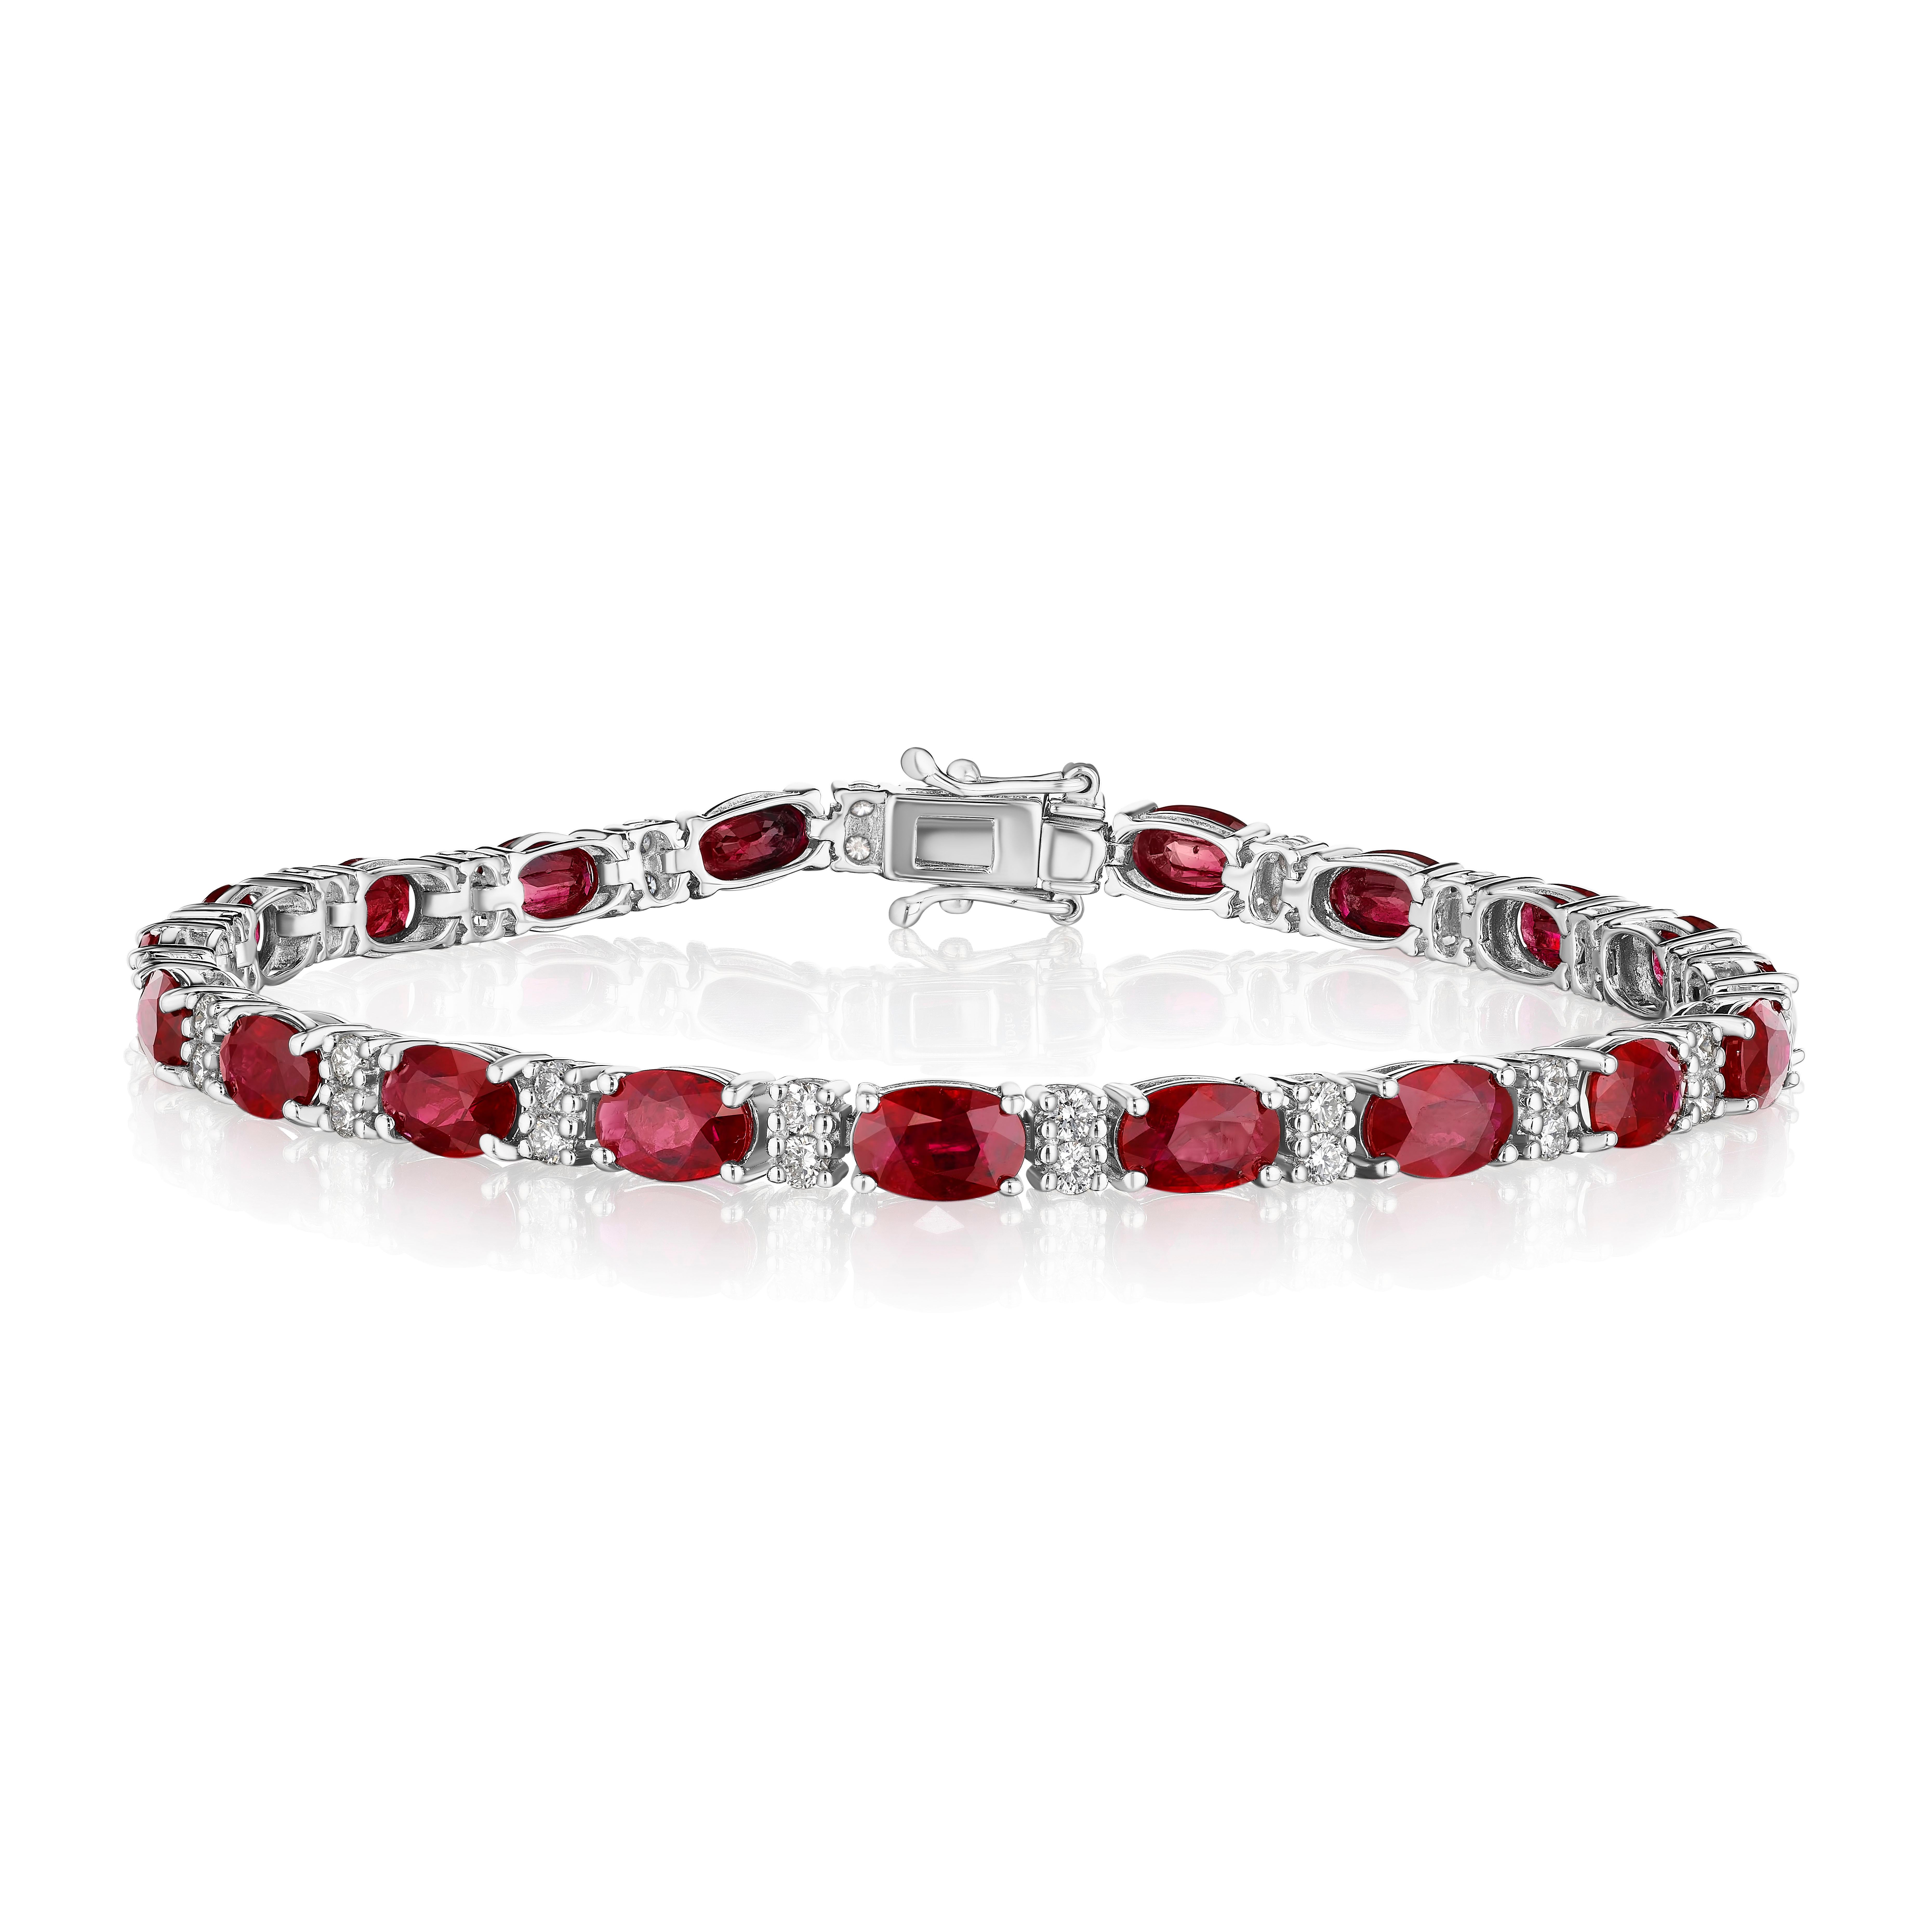 • A beautiful row of red oval cut rubies and white round brilliant cut diamonds encircle the wrist in this bracelet, set in 14KT gold. The bracelet measures 7